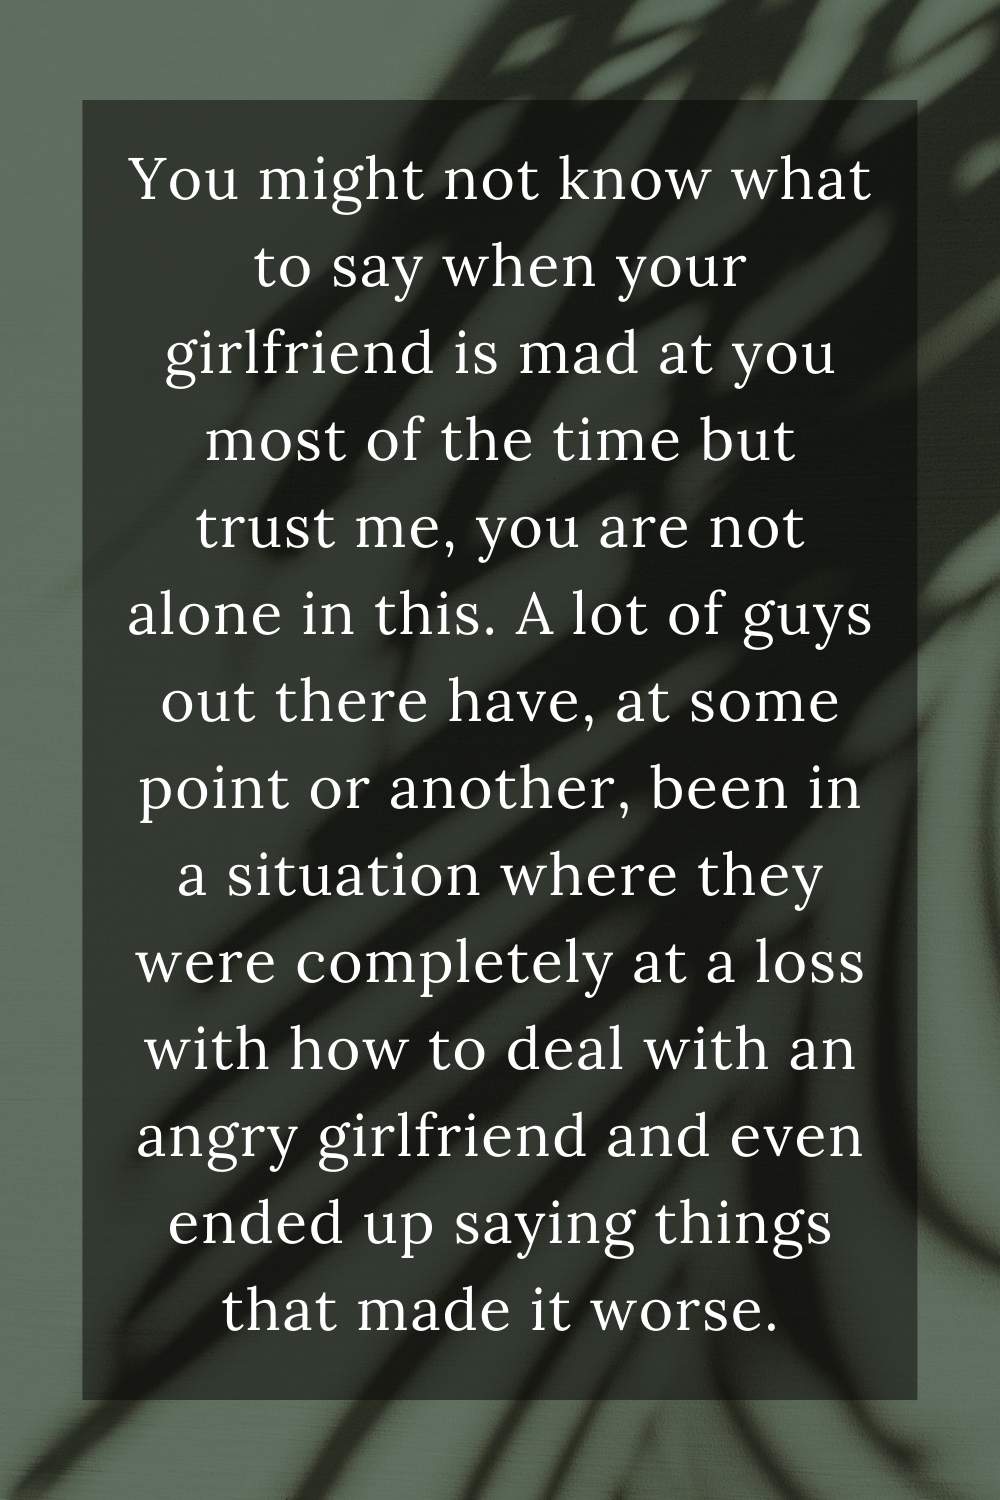 You might not know what to say when your girlfriend is mad at you most of the time but trust me, you are not alone in this. A lot of guys out there have, at some point or another, been in a situation where they were completely at a loss with how to deal with an angry girlfriend and even ended up saying things that made it worse.